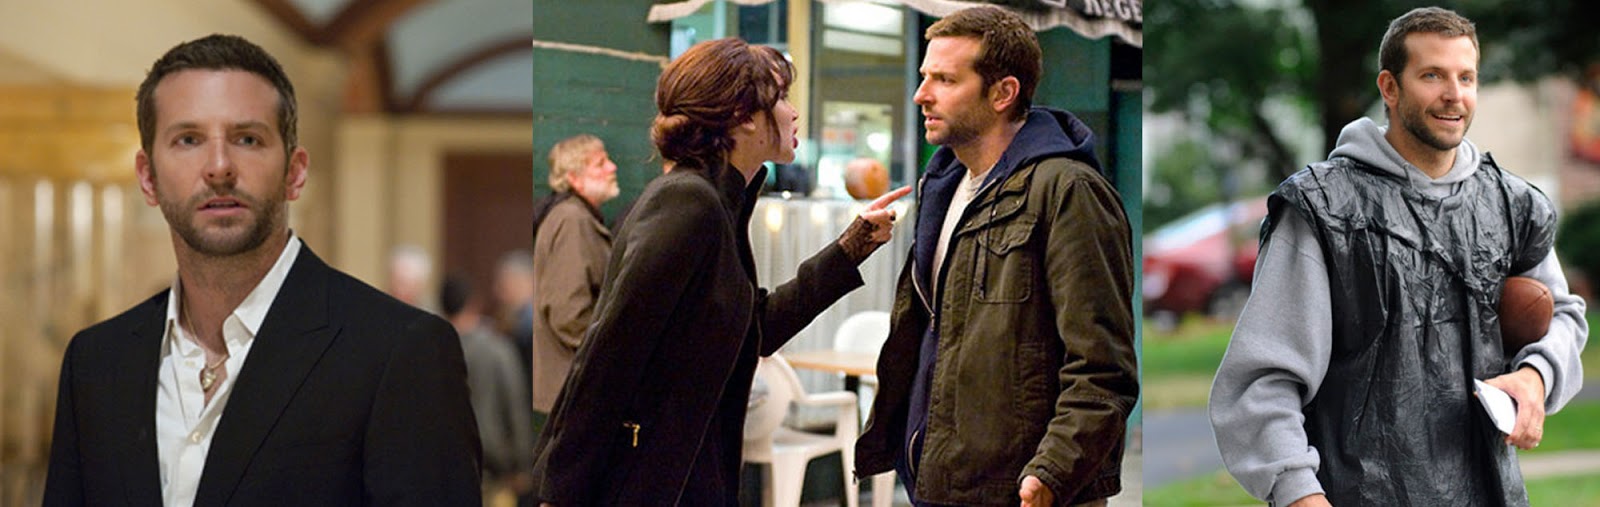 Sincerely Sara Style And Books Inspired By Silver Linings Playbook